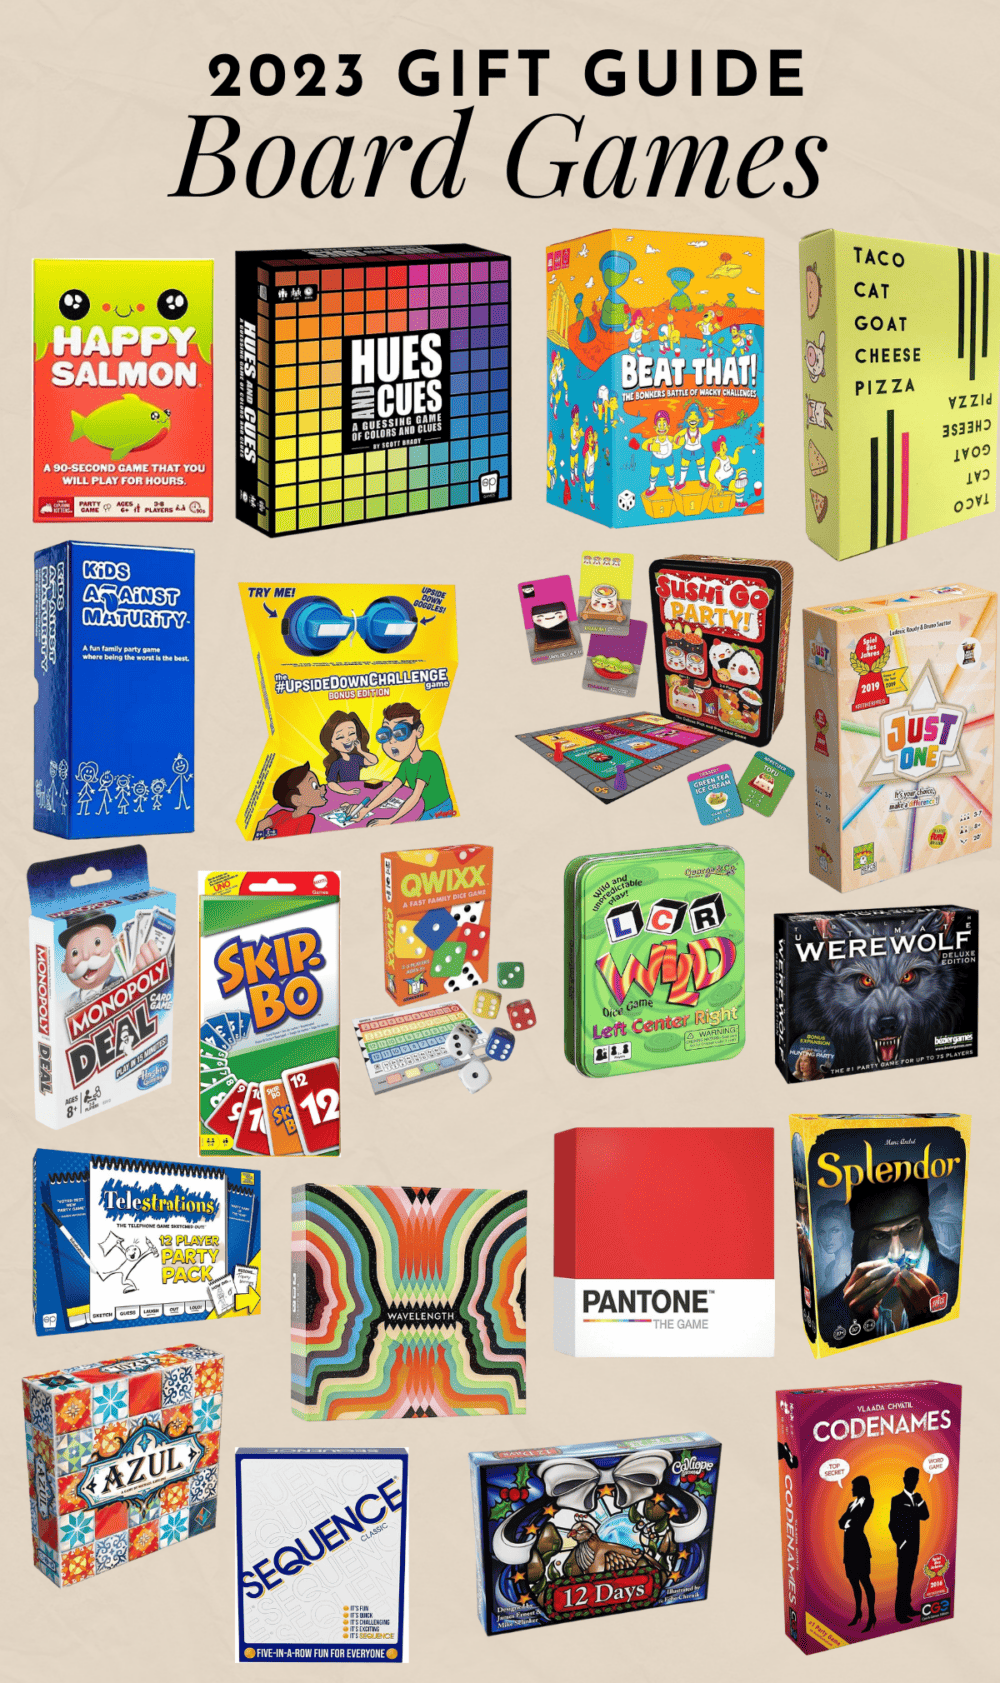 Best Board Game Gift Ideas for 2023 - IGN